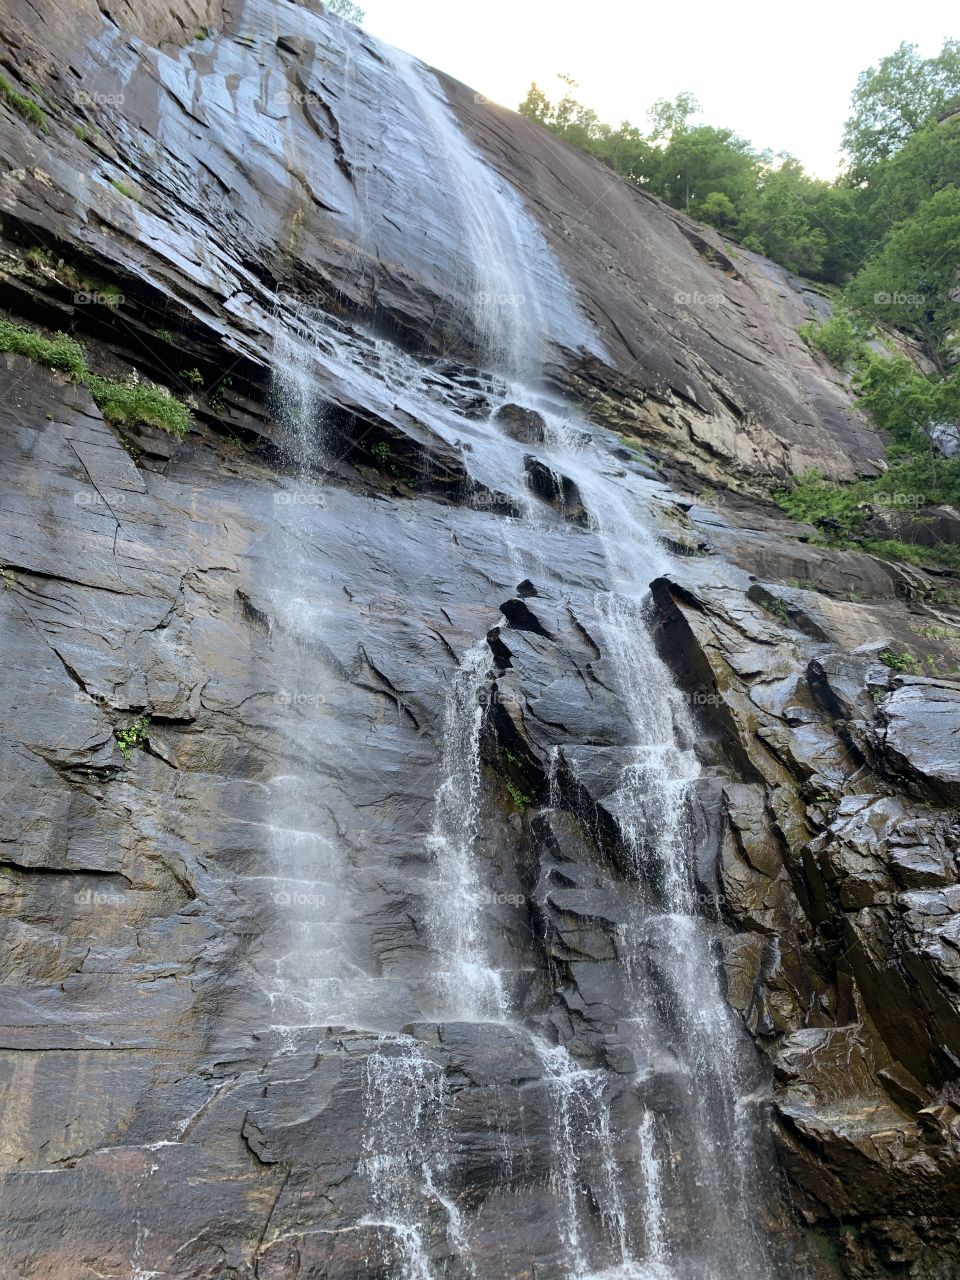 A pleasing, gentle waterfall found in the mountains of North Carolina